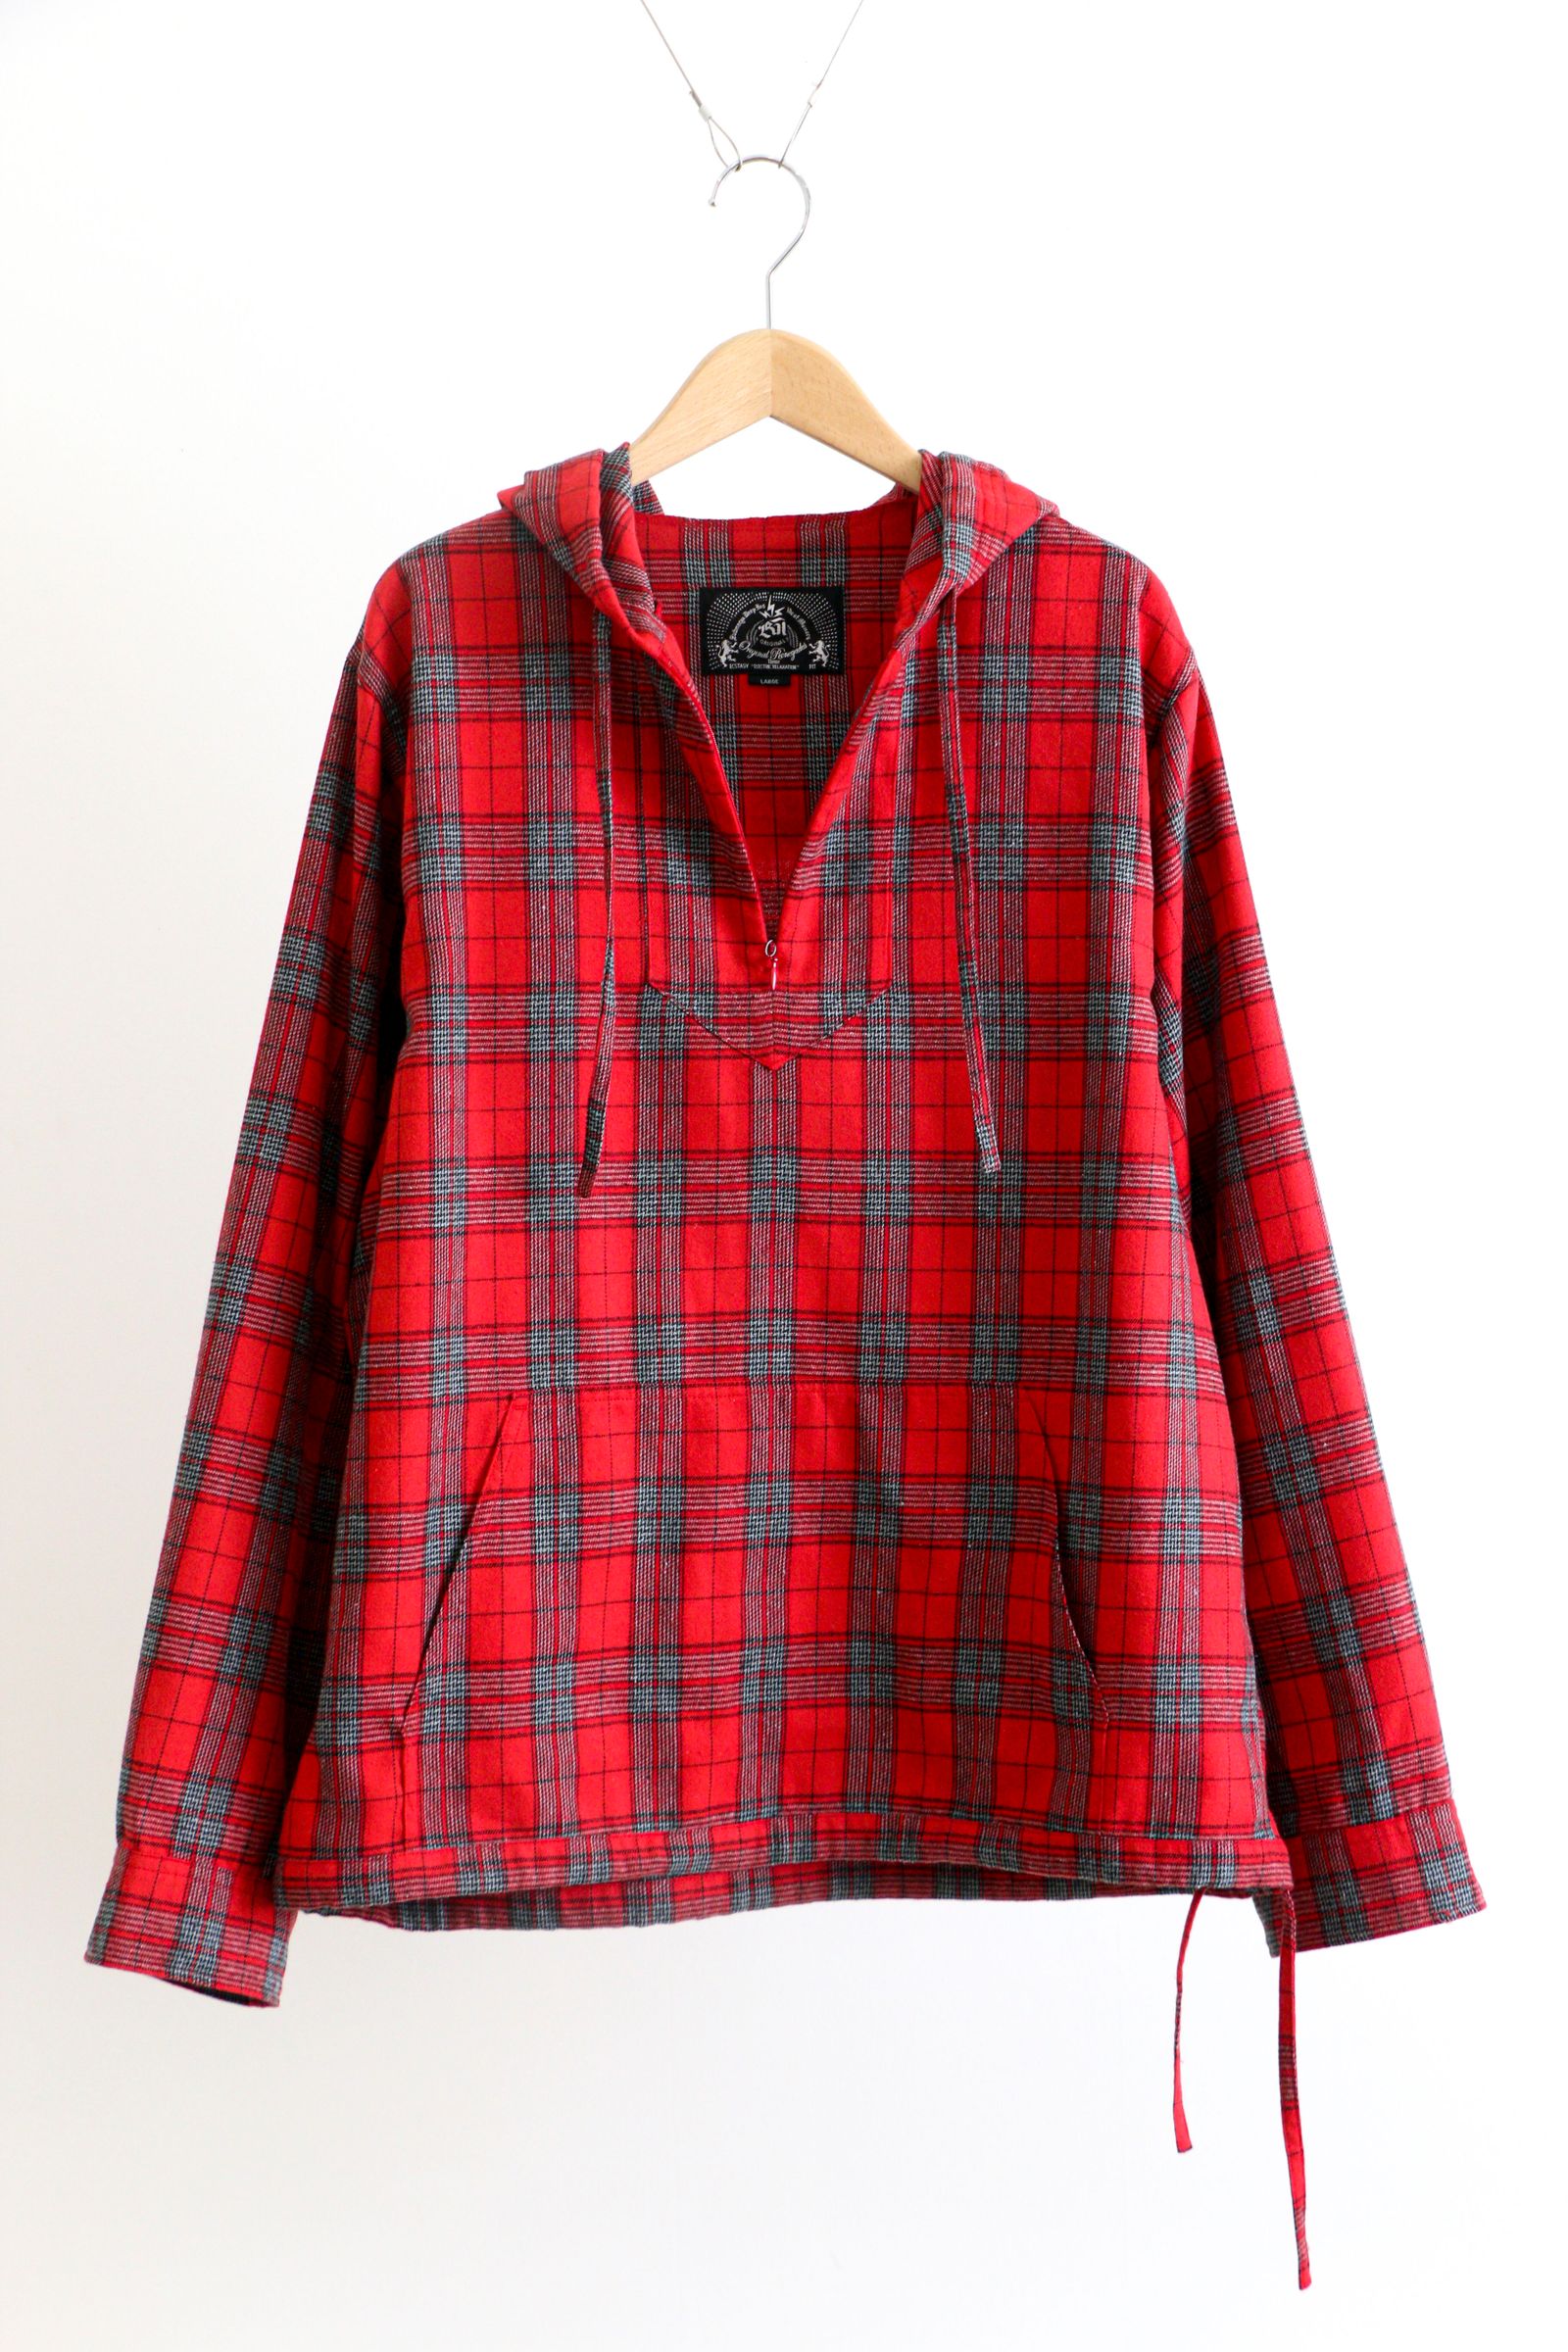 bal - PULLOVER MEXICAN HOODED SHIRT RED / プルオーバー